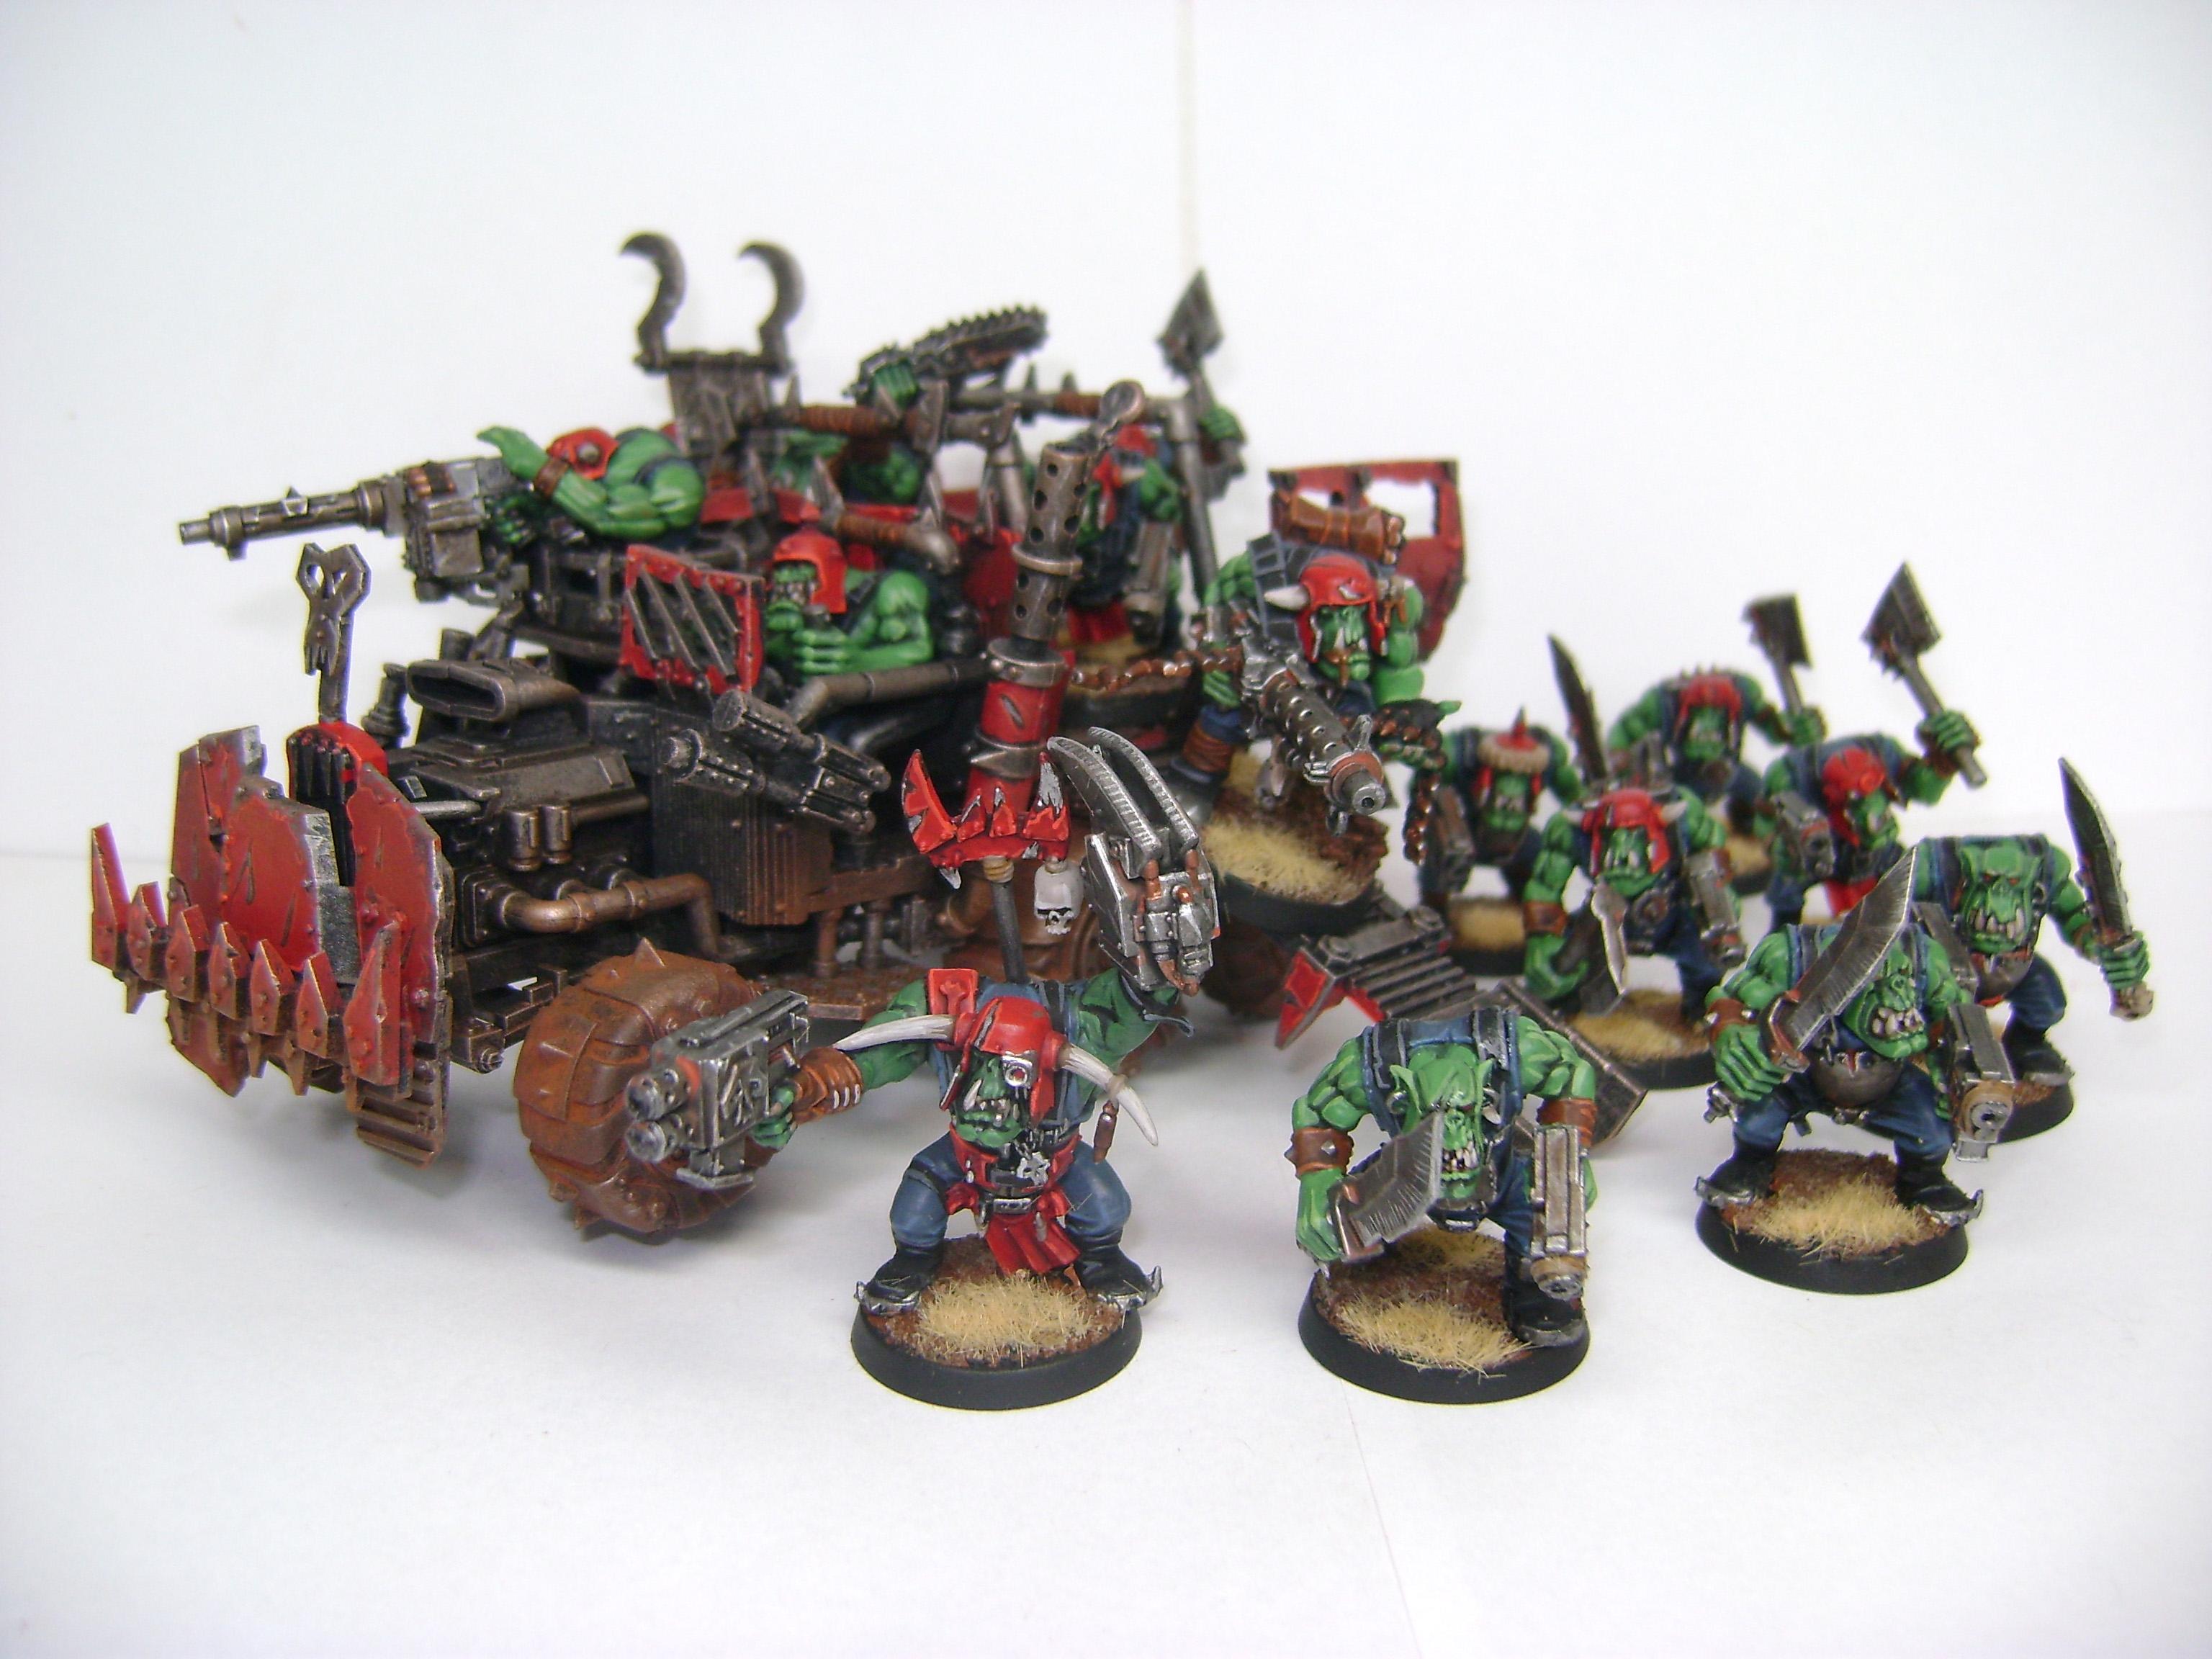 Ork truck and mob from the dark reapaz clan